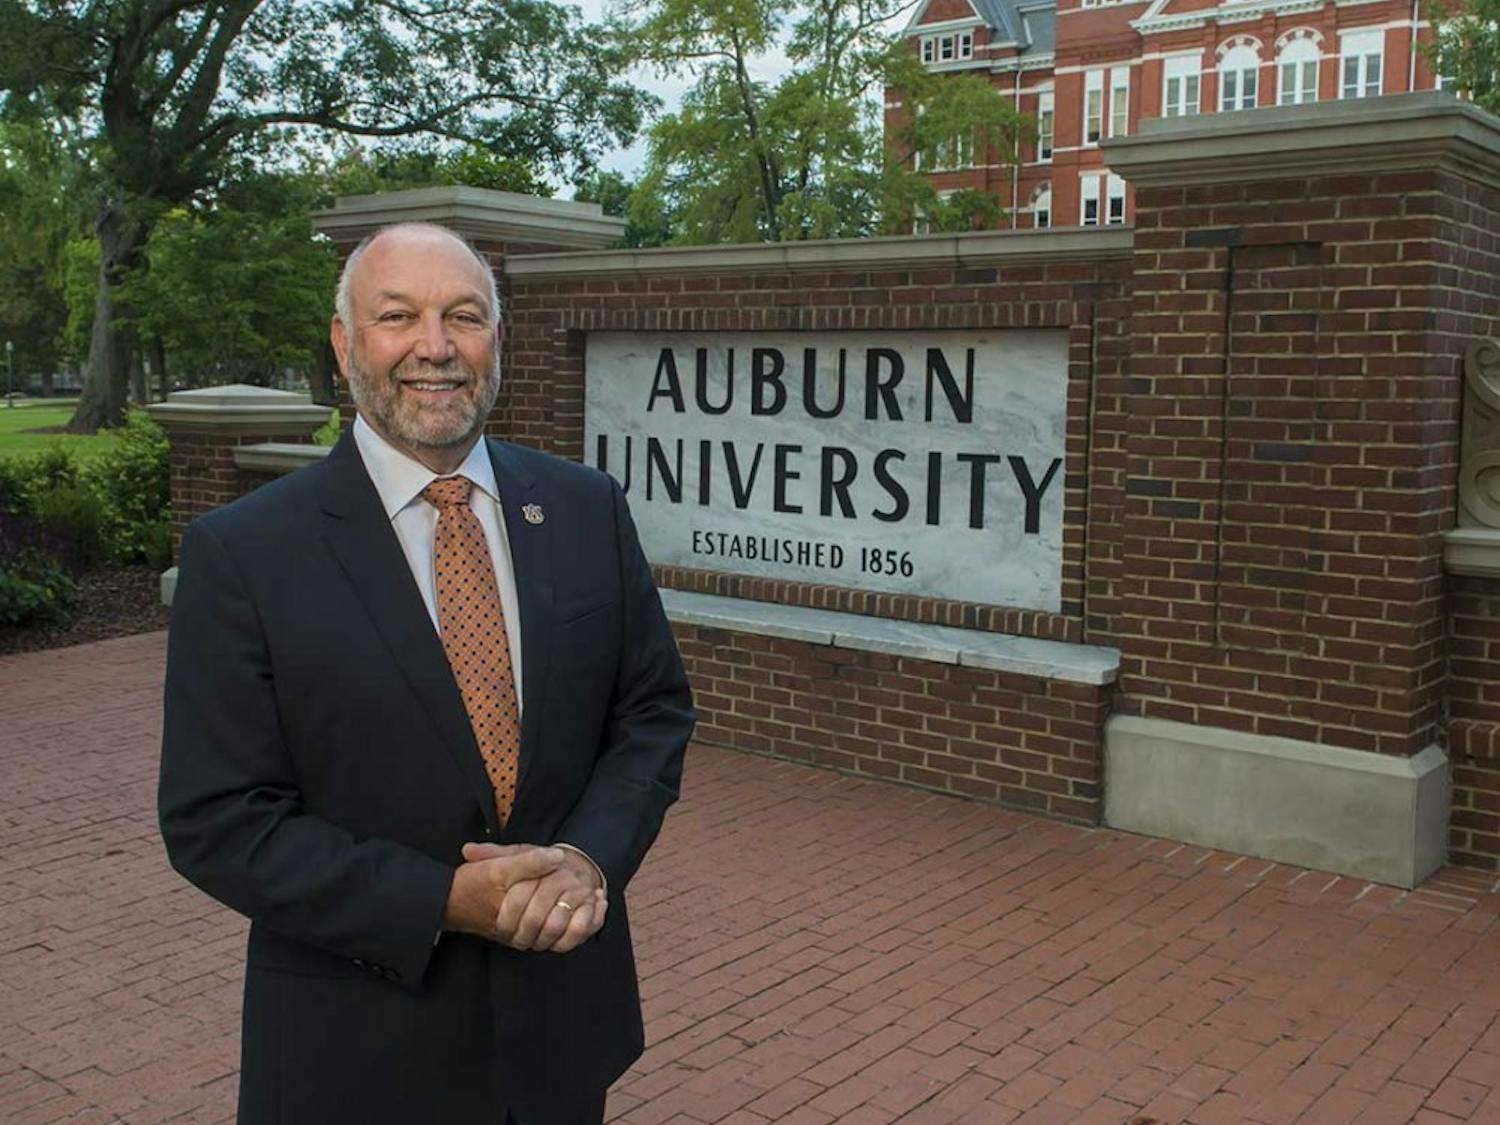 Dr. Leath in front of the Auburn University sign